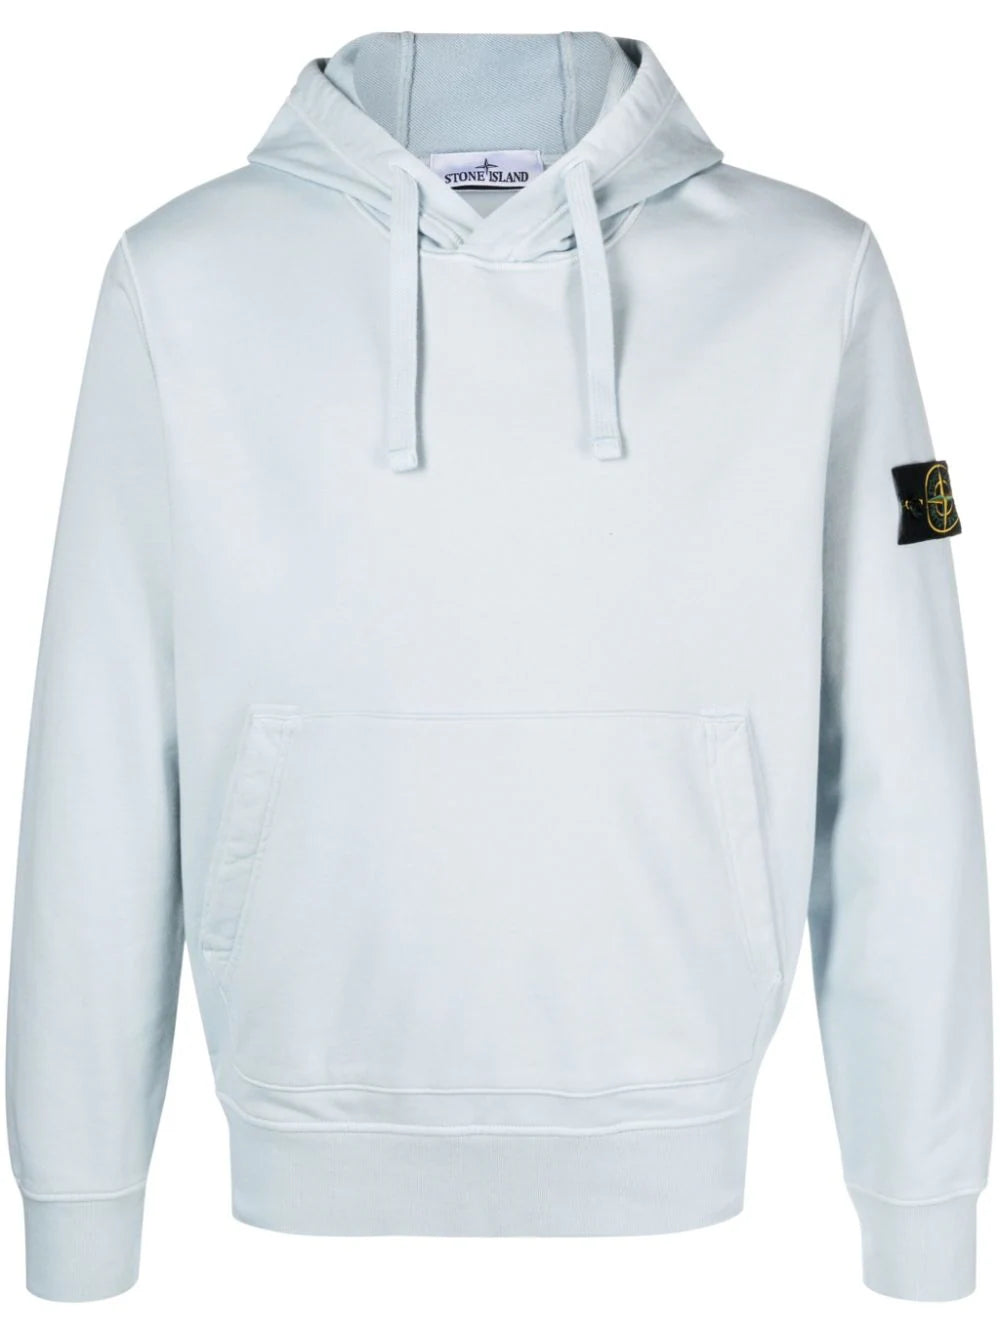 Stone Island Compass Badge Cotton Hoodie in Sky Blue